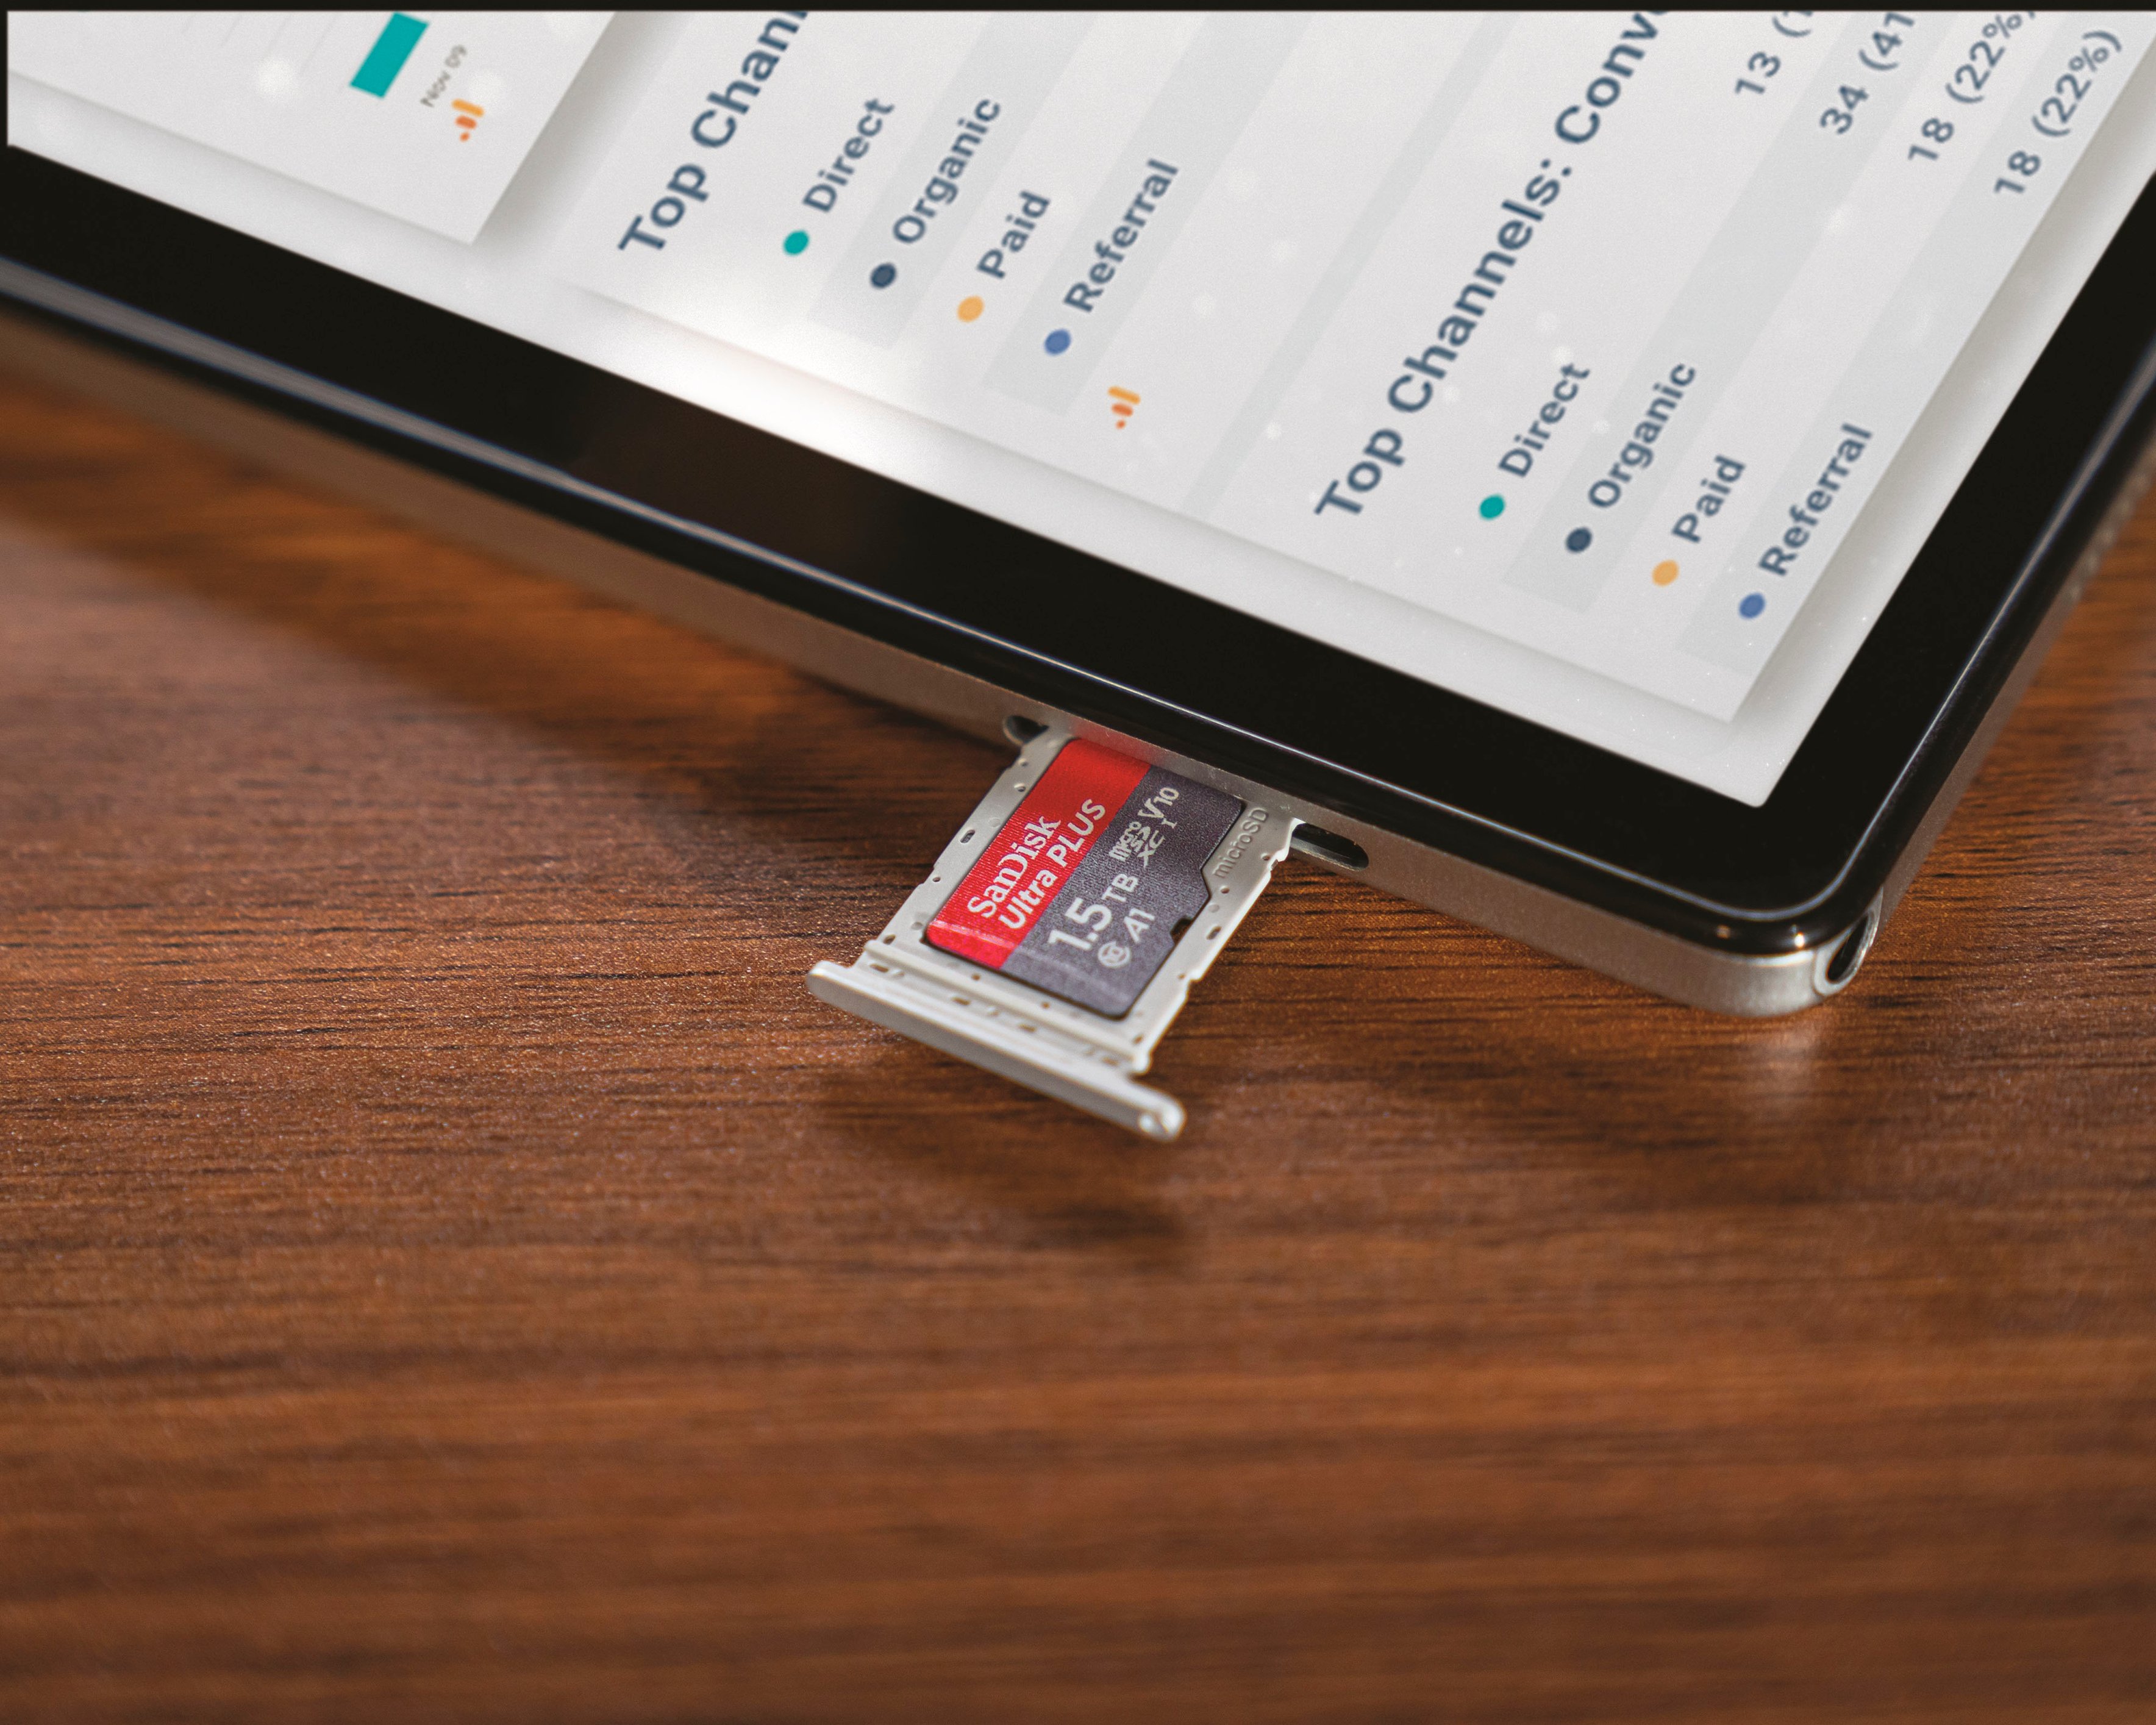 SanDisk Ultra UHS I 1TB MicroSD Card 120MB/s R, for Smartphones - Buy  SanDisk Ultra UHS I 1TB MicroSD Card 120MB/s R, for Smartphones Online at  Low